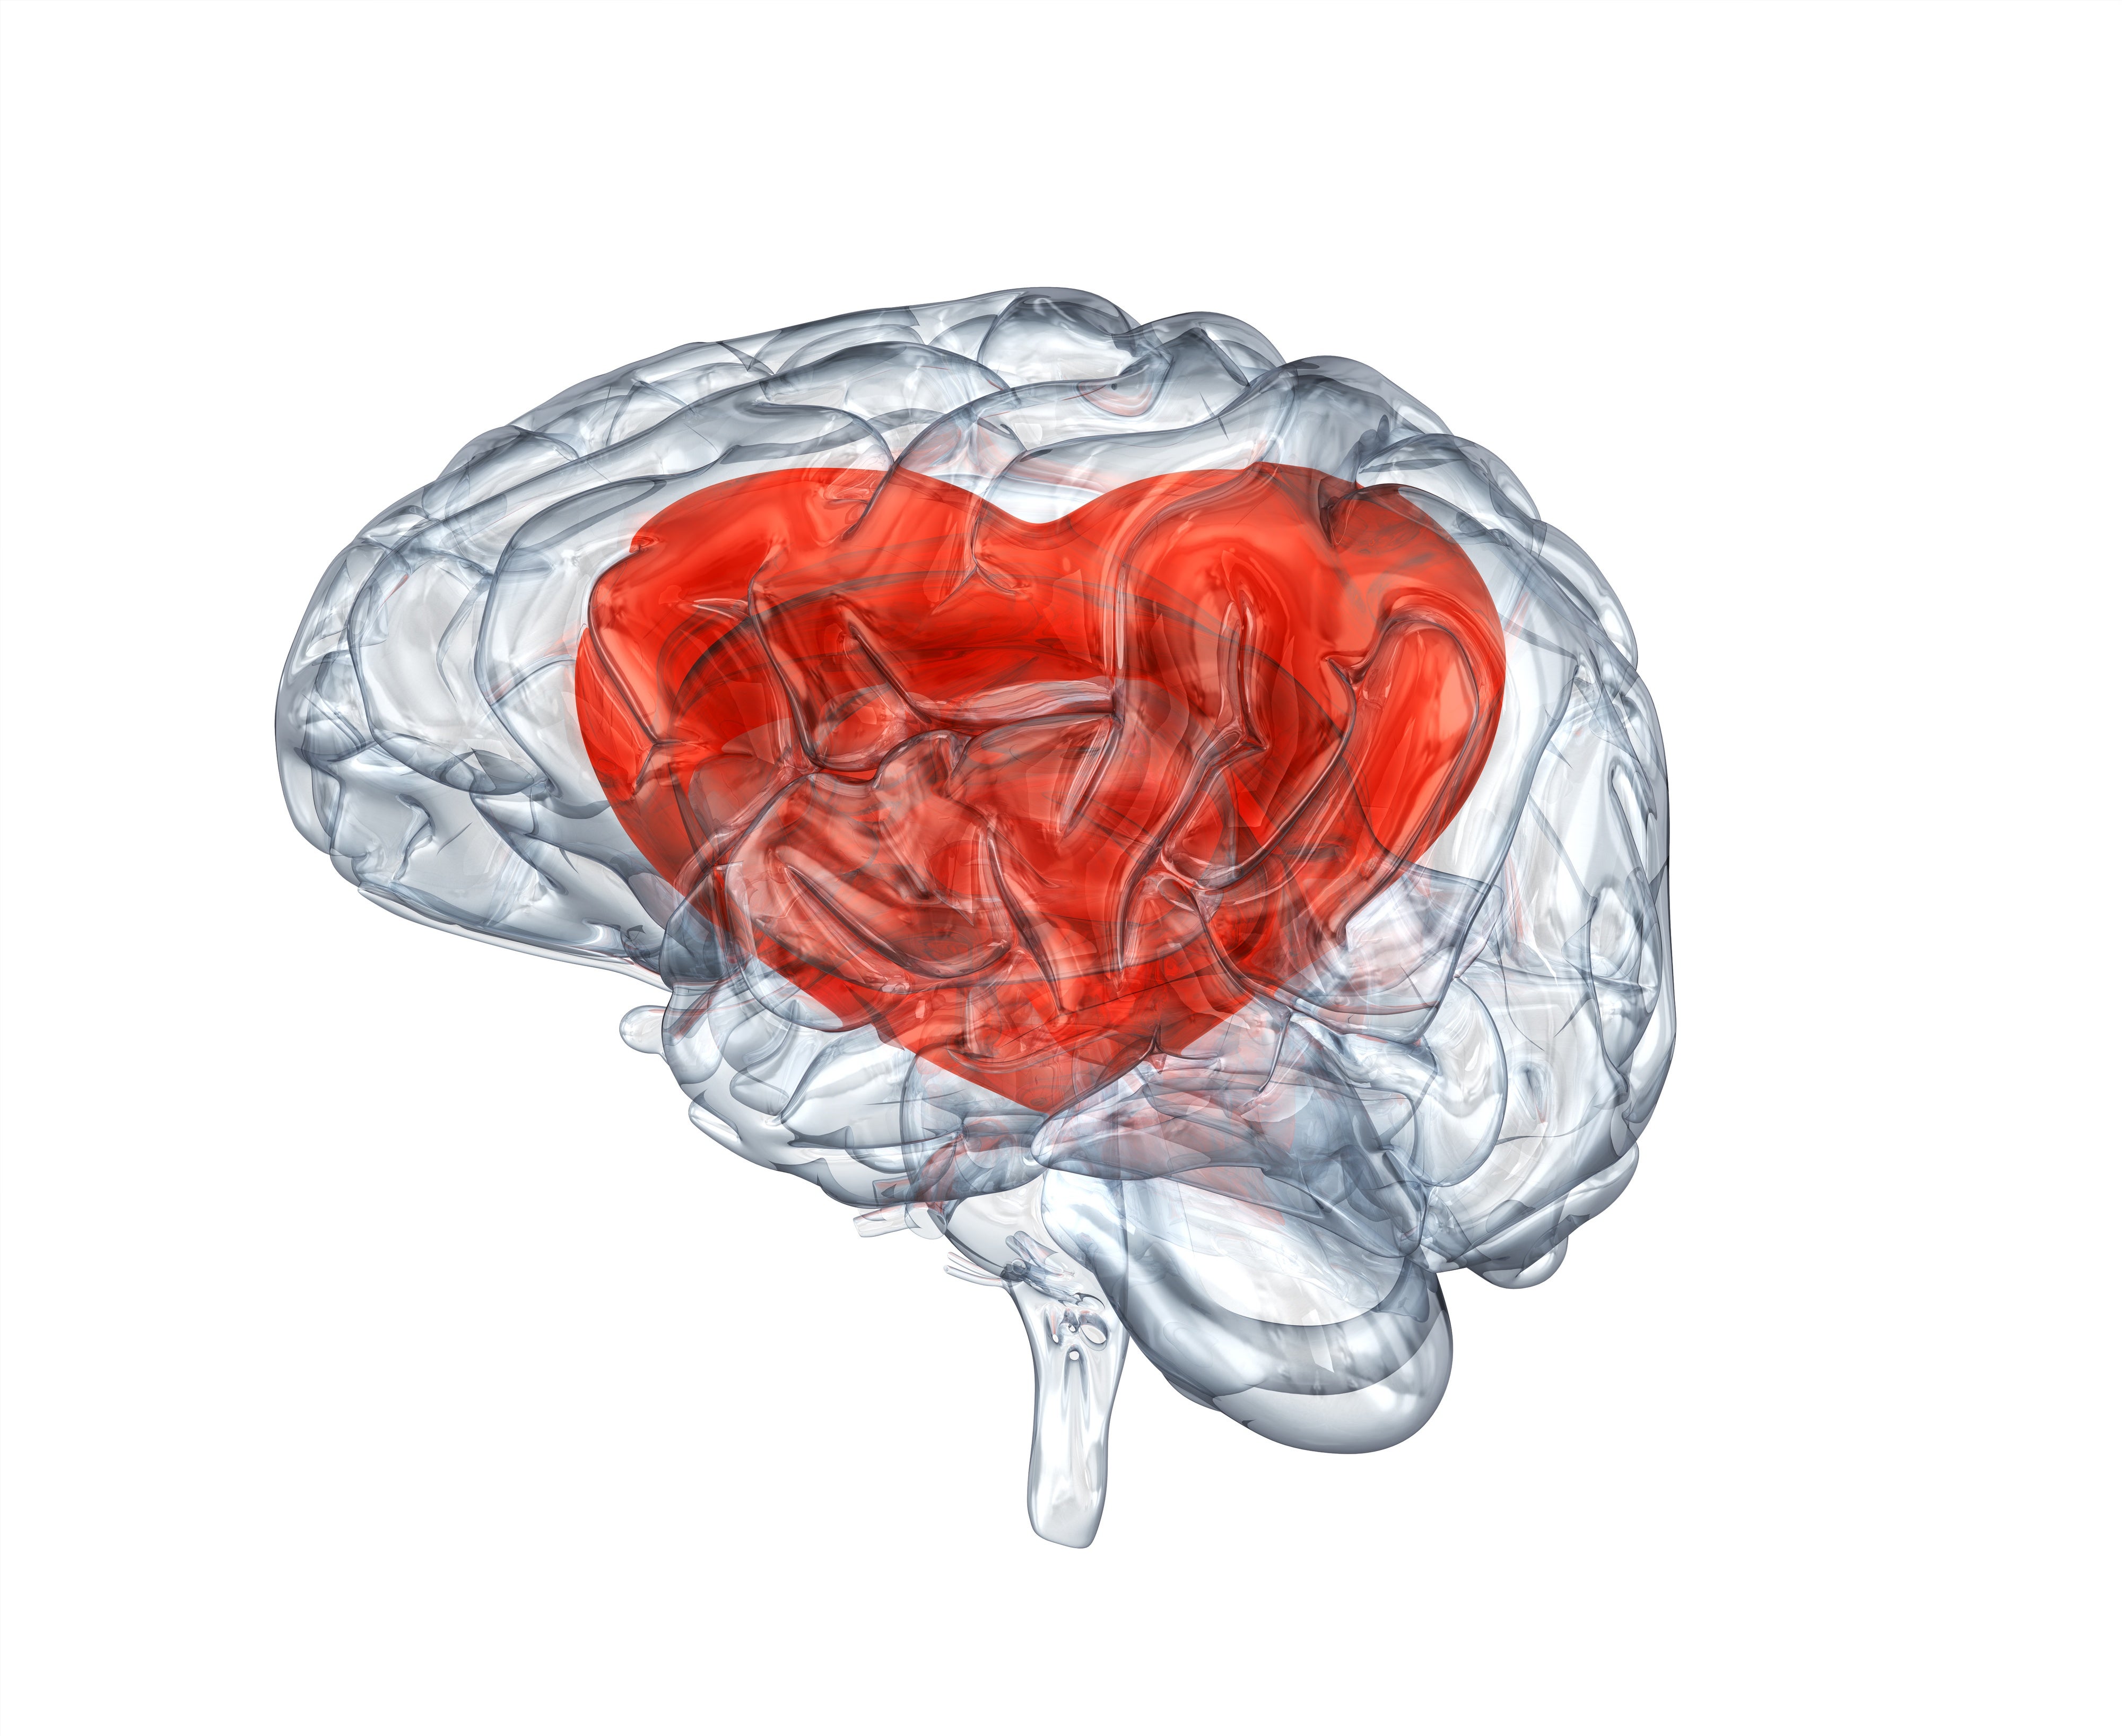 sum Kritik Skriv email What Goes On in Our Brains When We Are in Love? - Scientific American